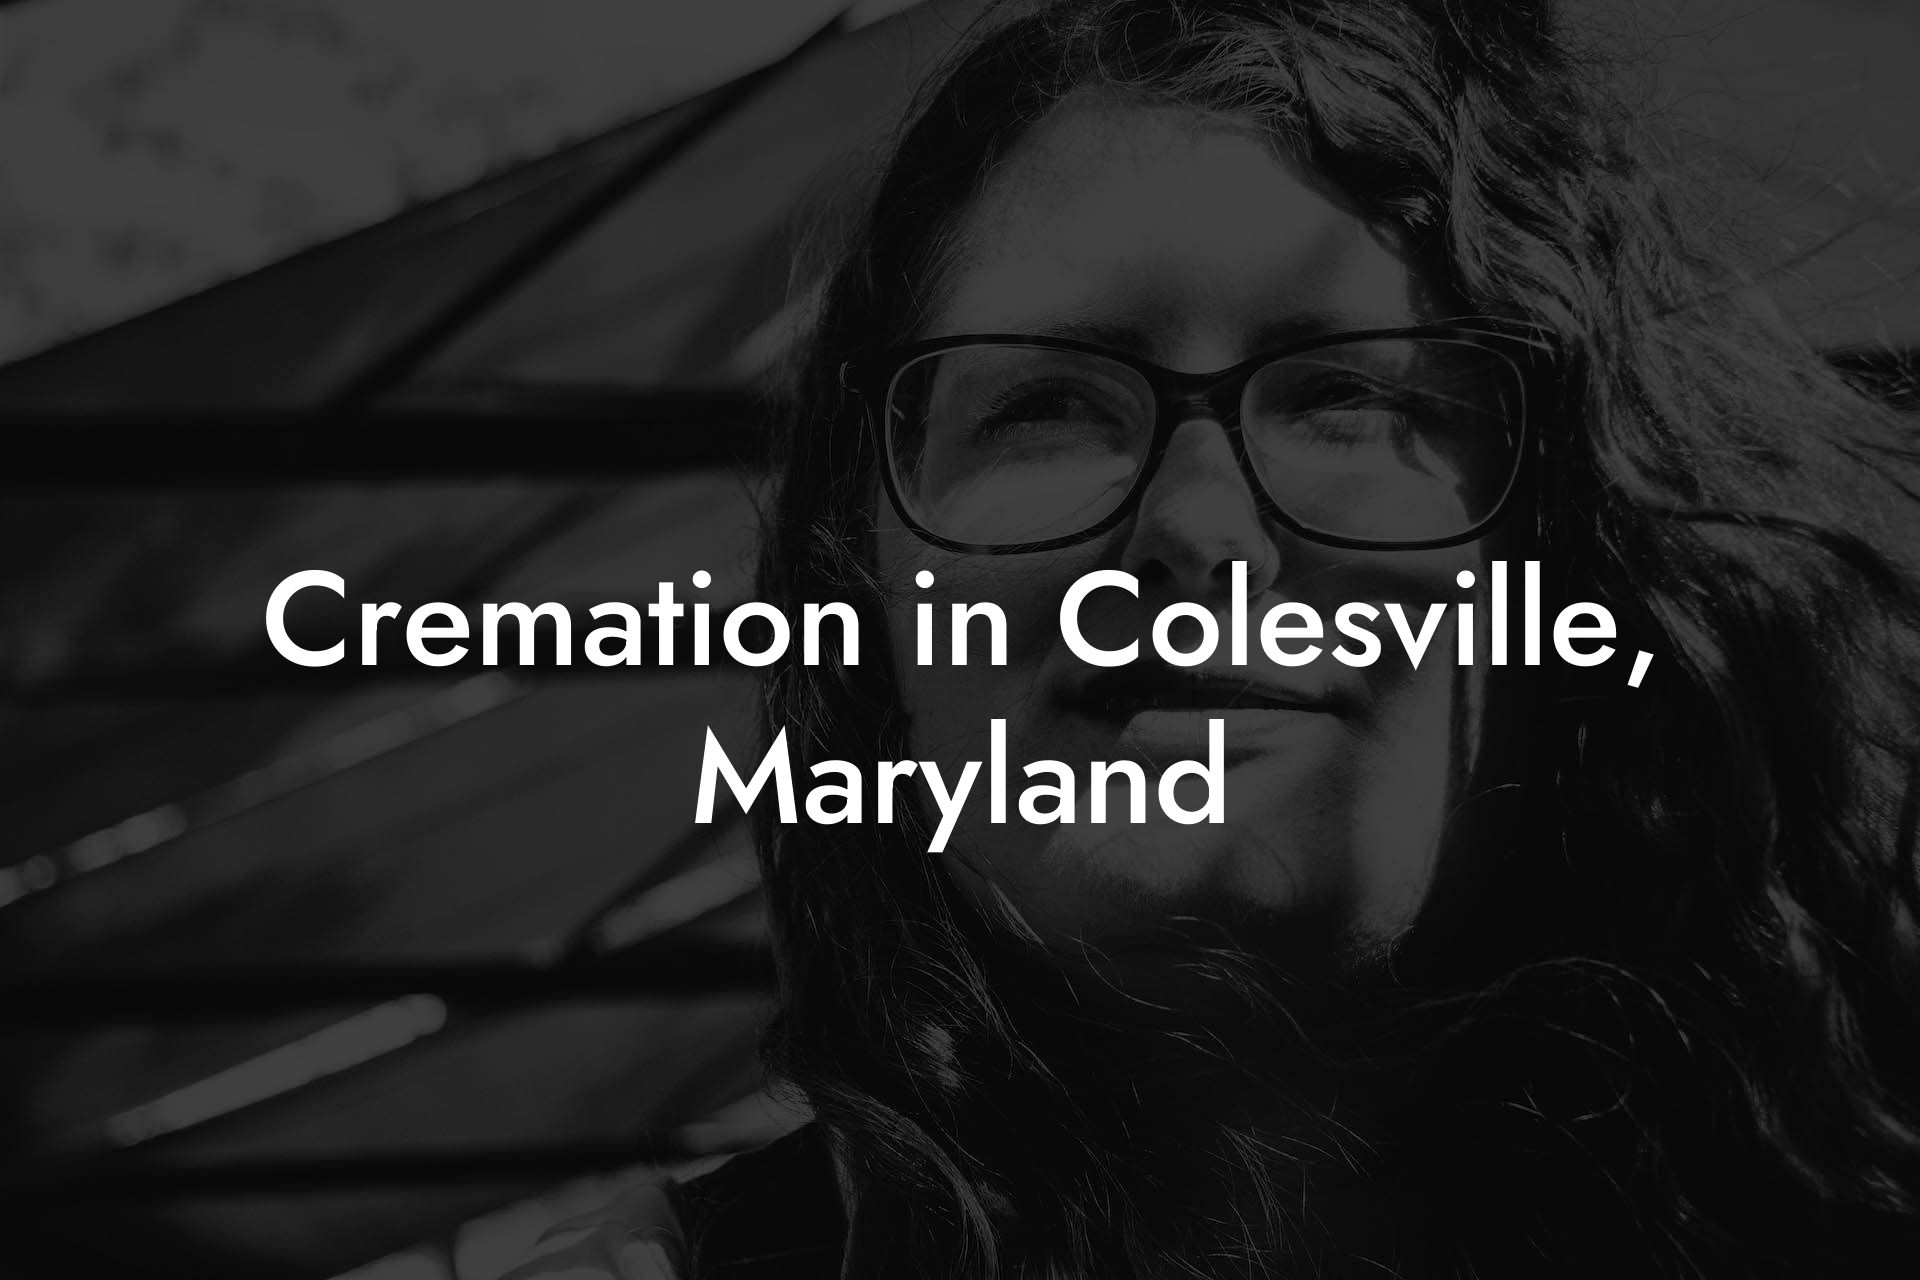 Cremation in Colesville, Maryland